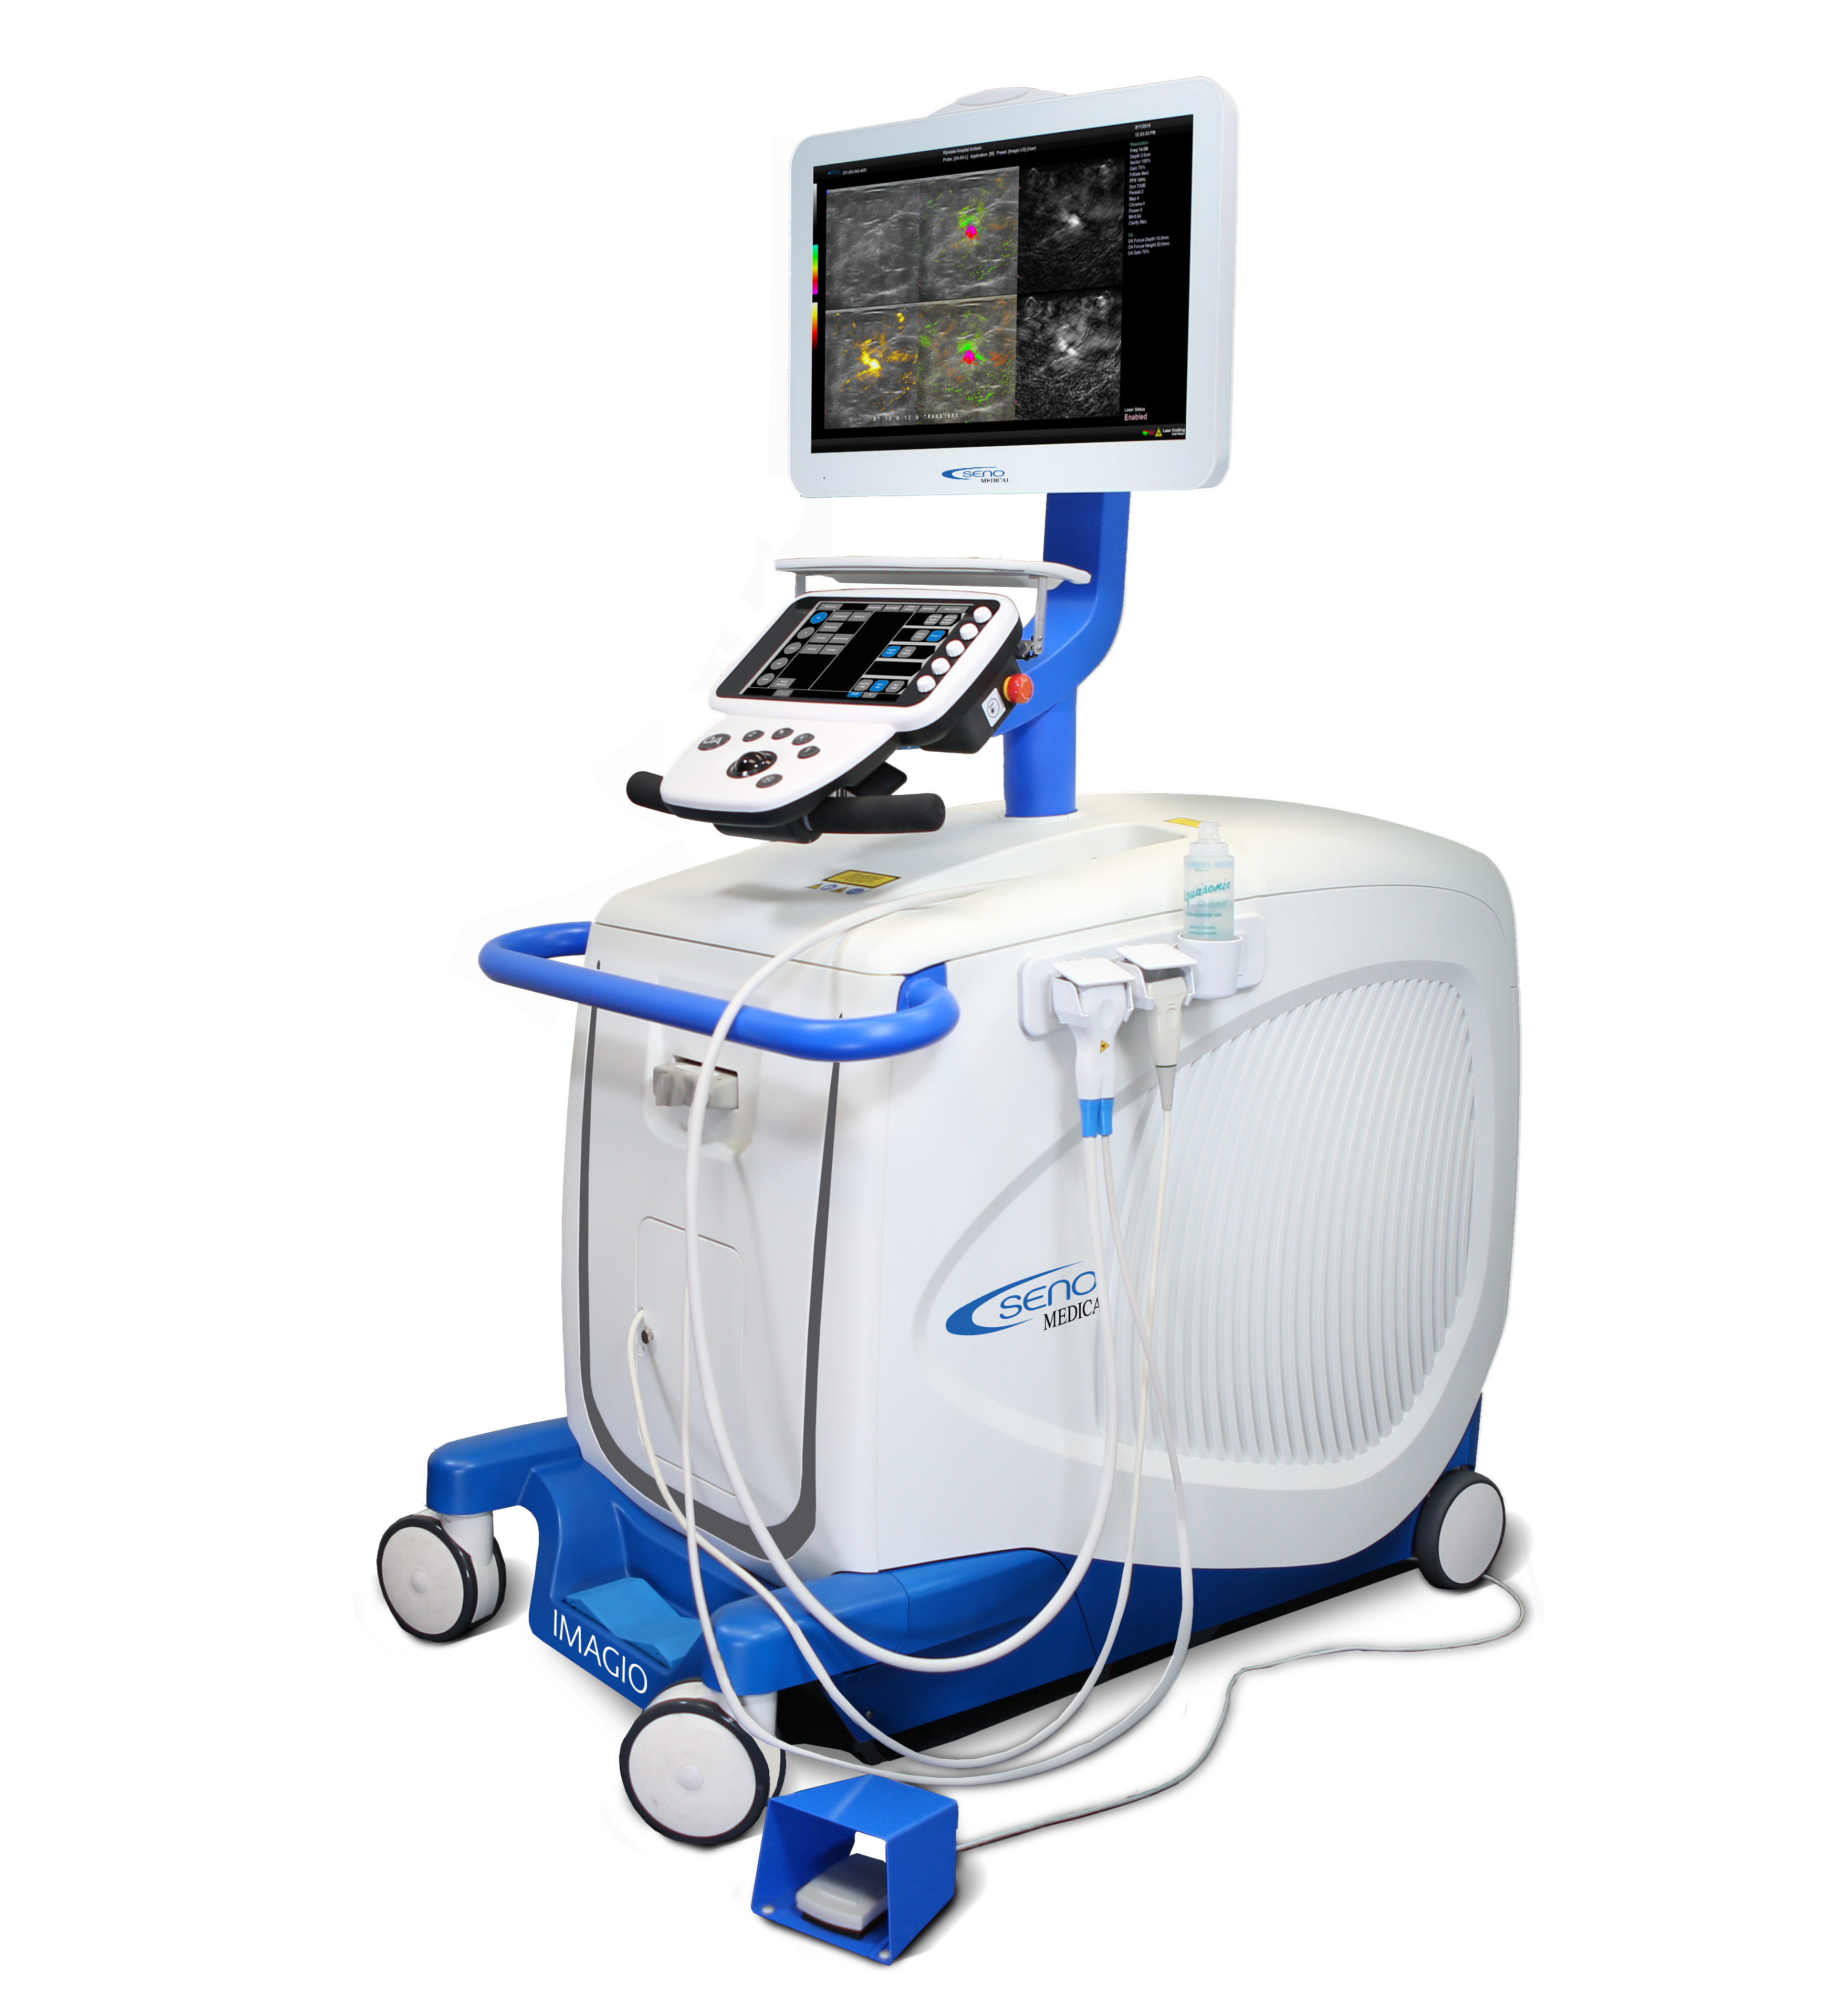 Edison Awards Program Honors Seno Medical’s Imagio® Breast Imaging System With a “Best of the Best” GOLD Award